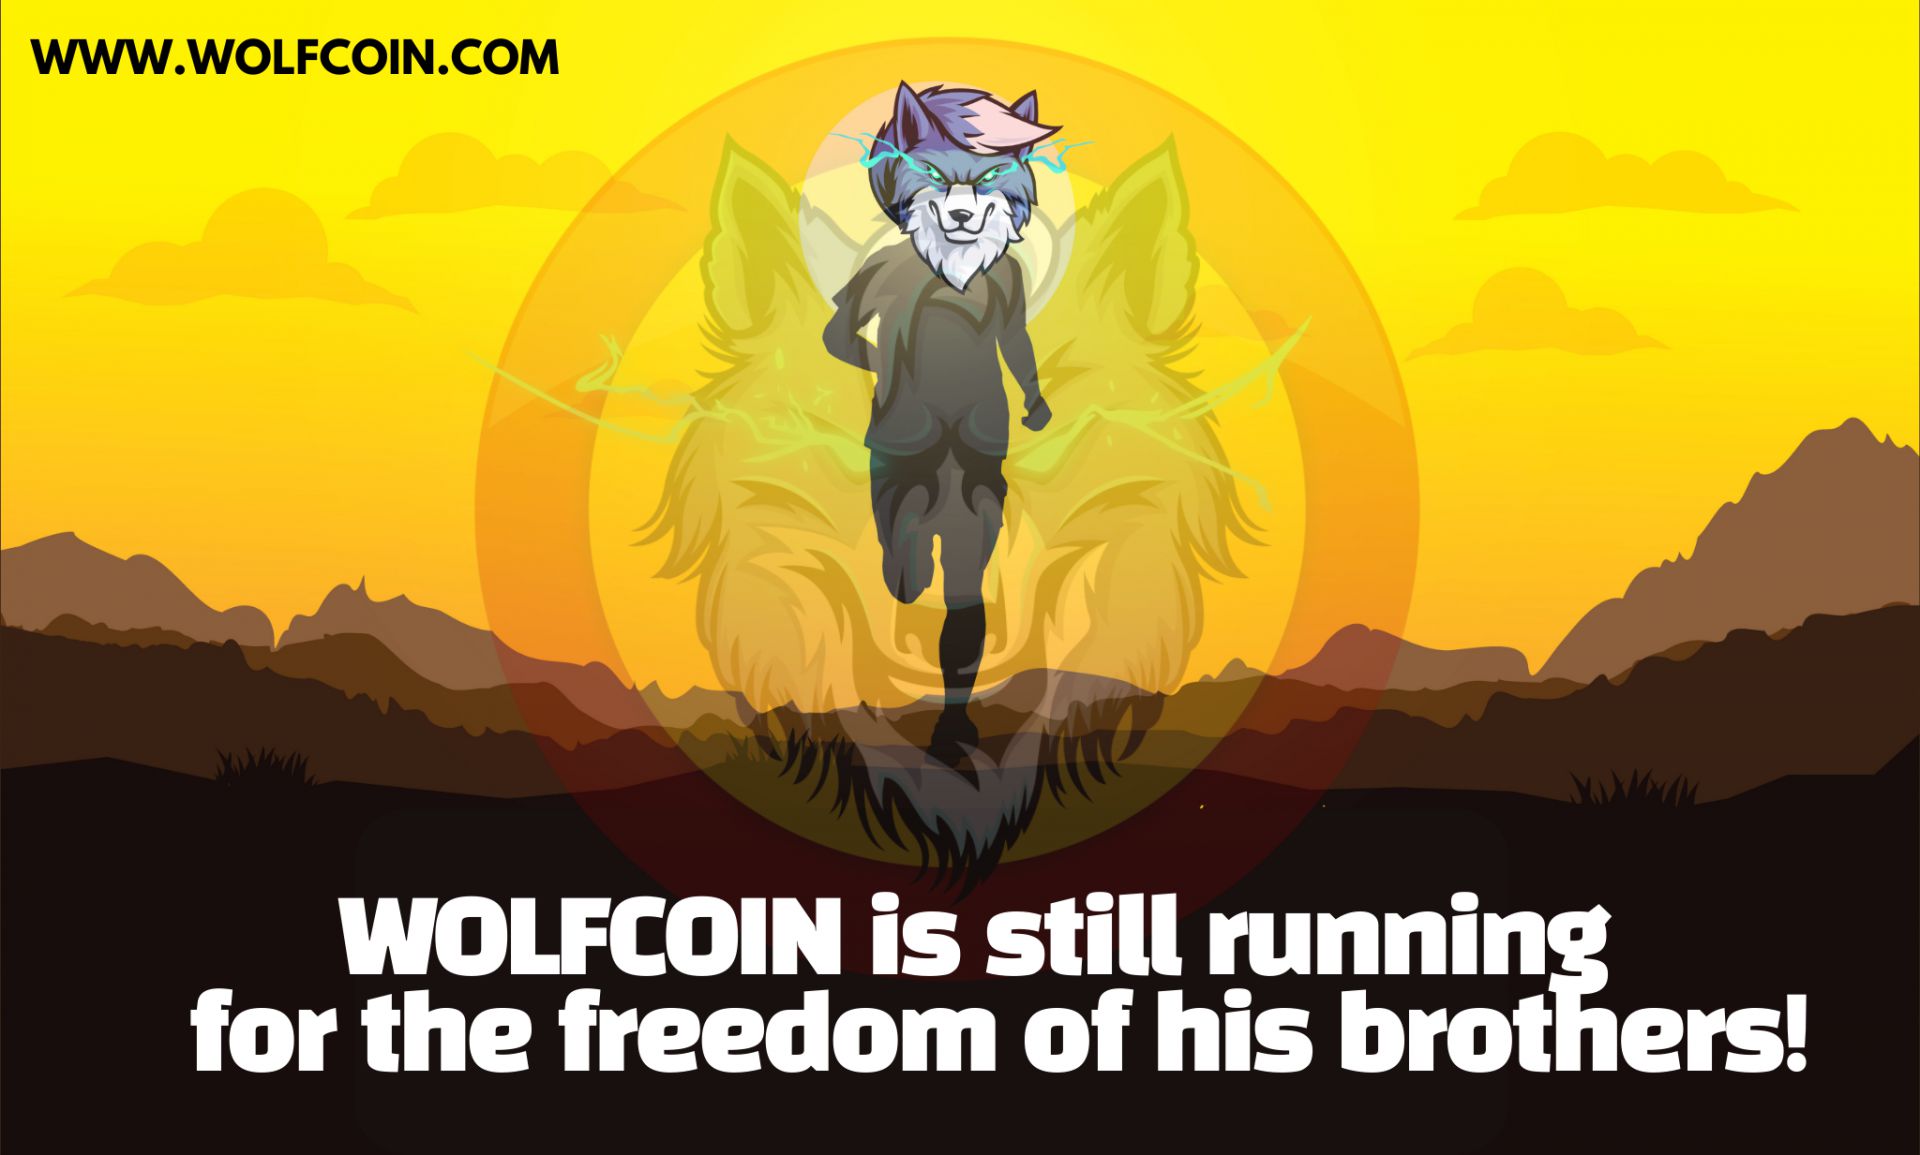 wolfcoin is freedom.png.jpg